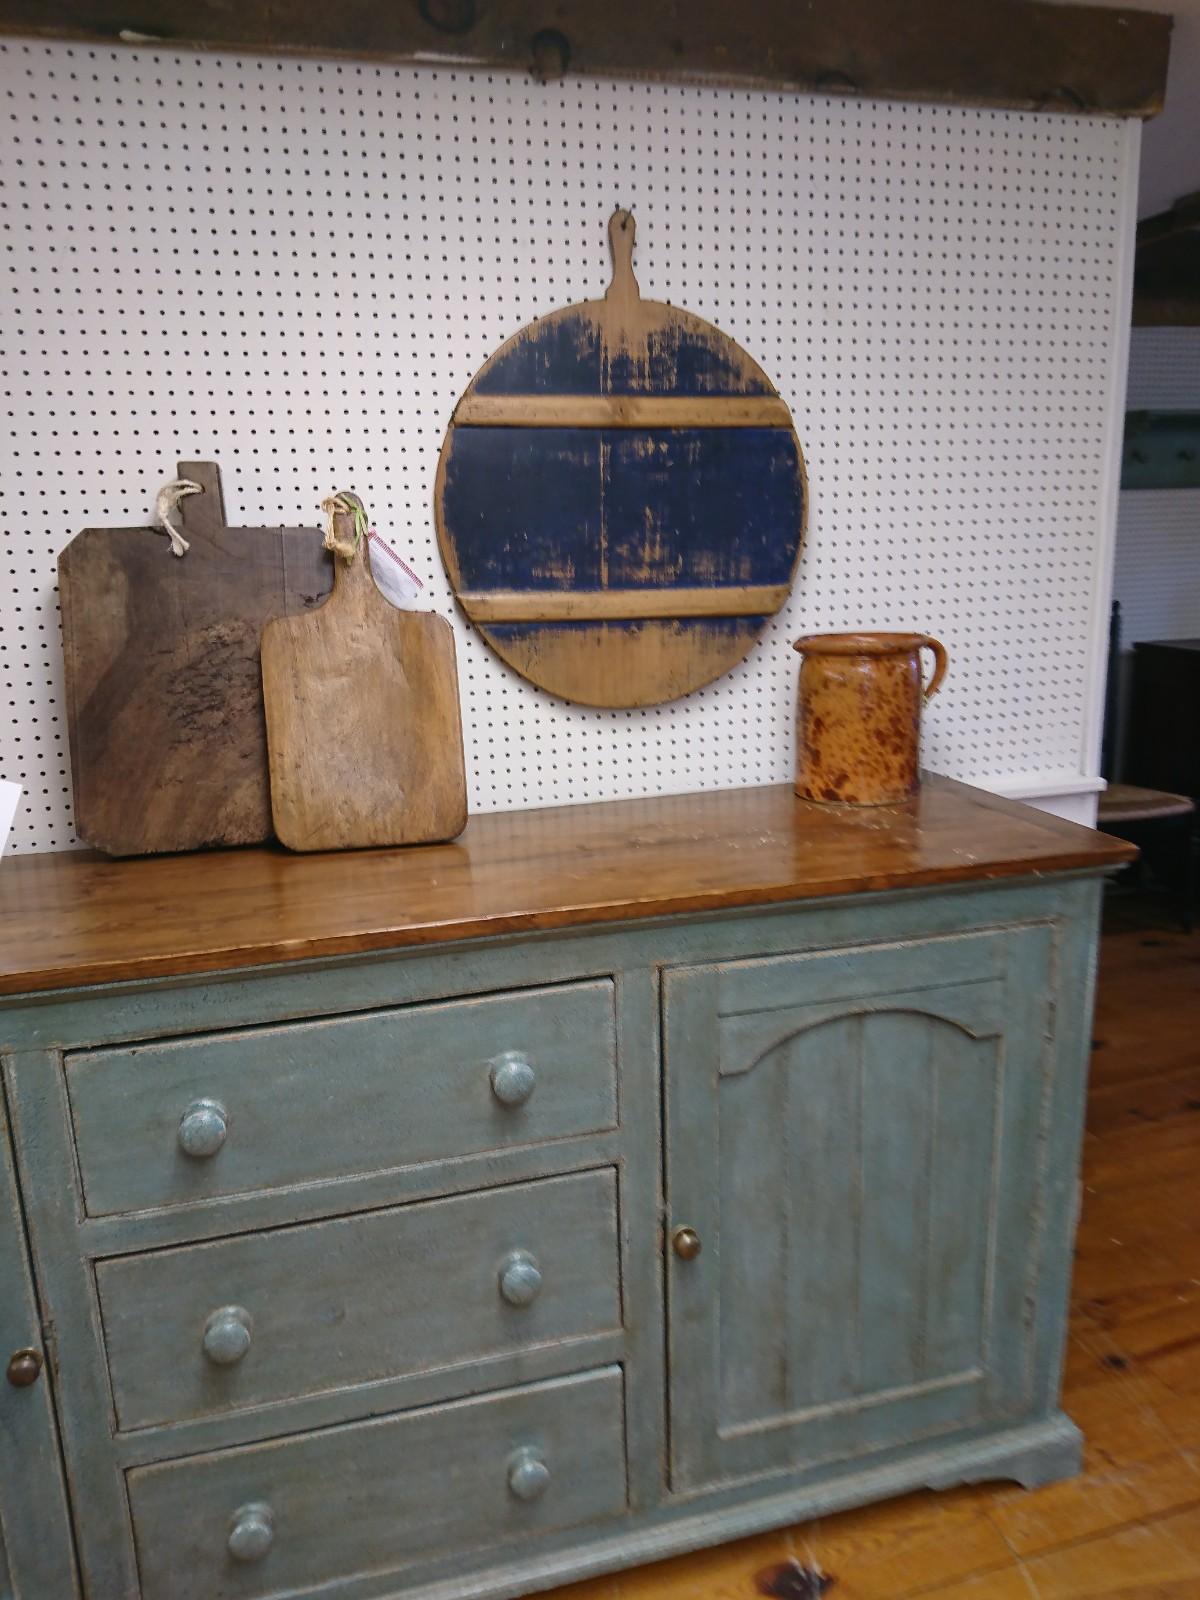 A great find! peel boards were used for preparing vegetables. This one has traces of blue paint on one side, and unfinished wood with a rich patina on the other. Both sides are equally attractive for display!